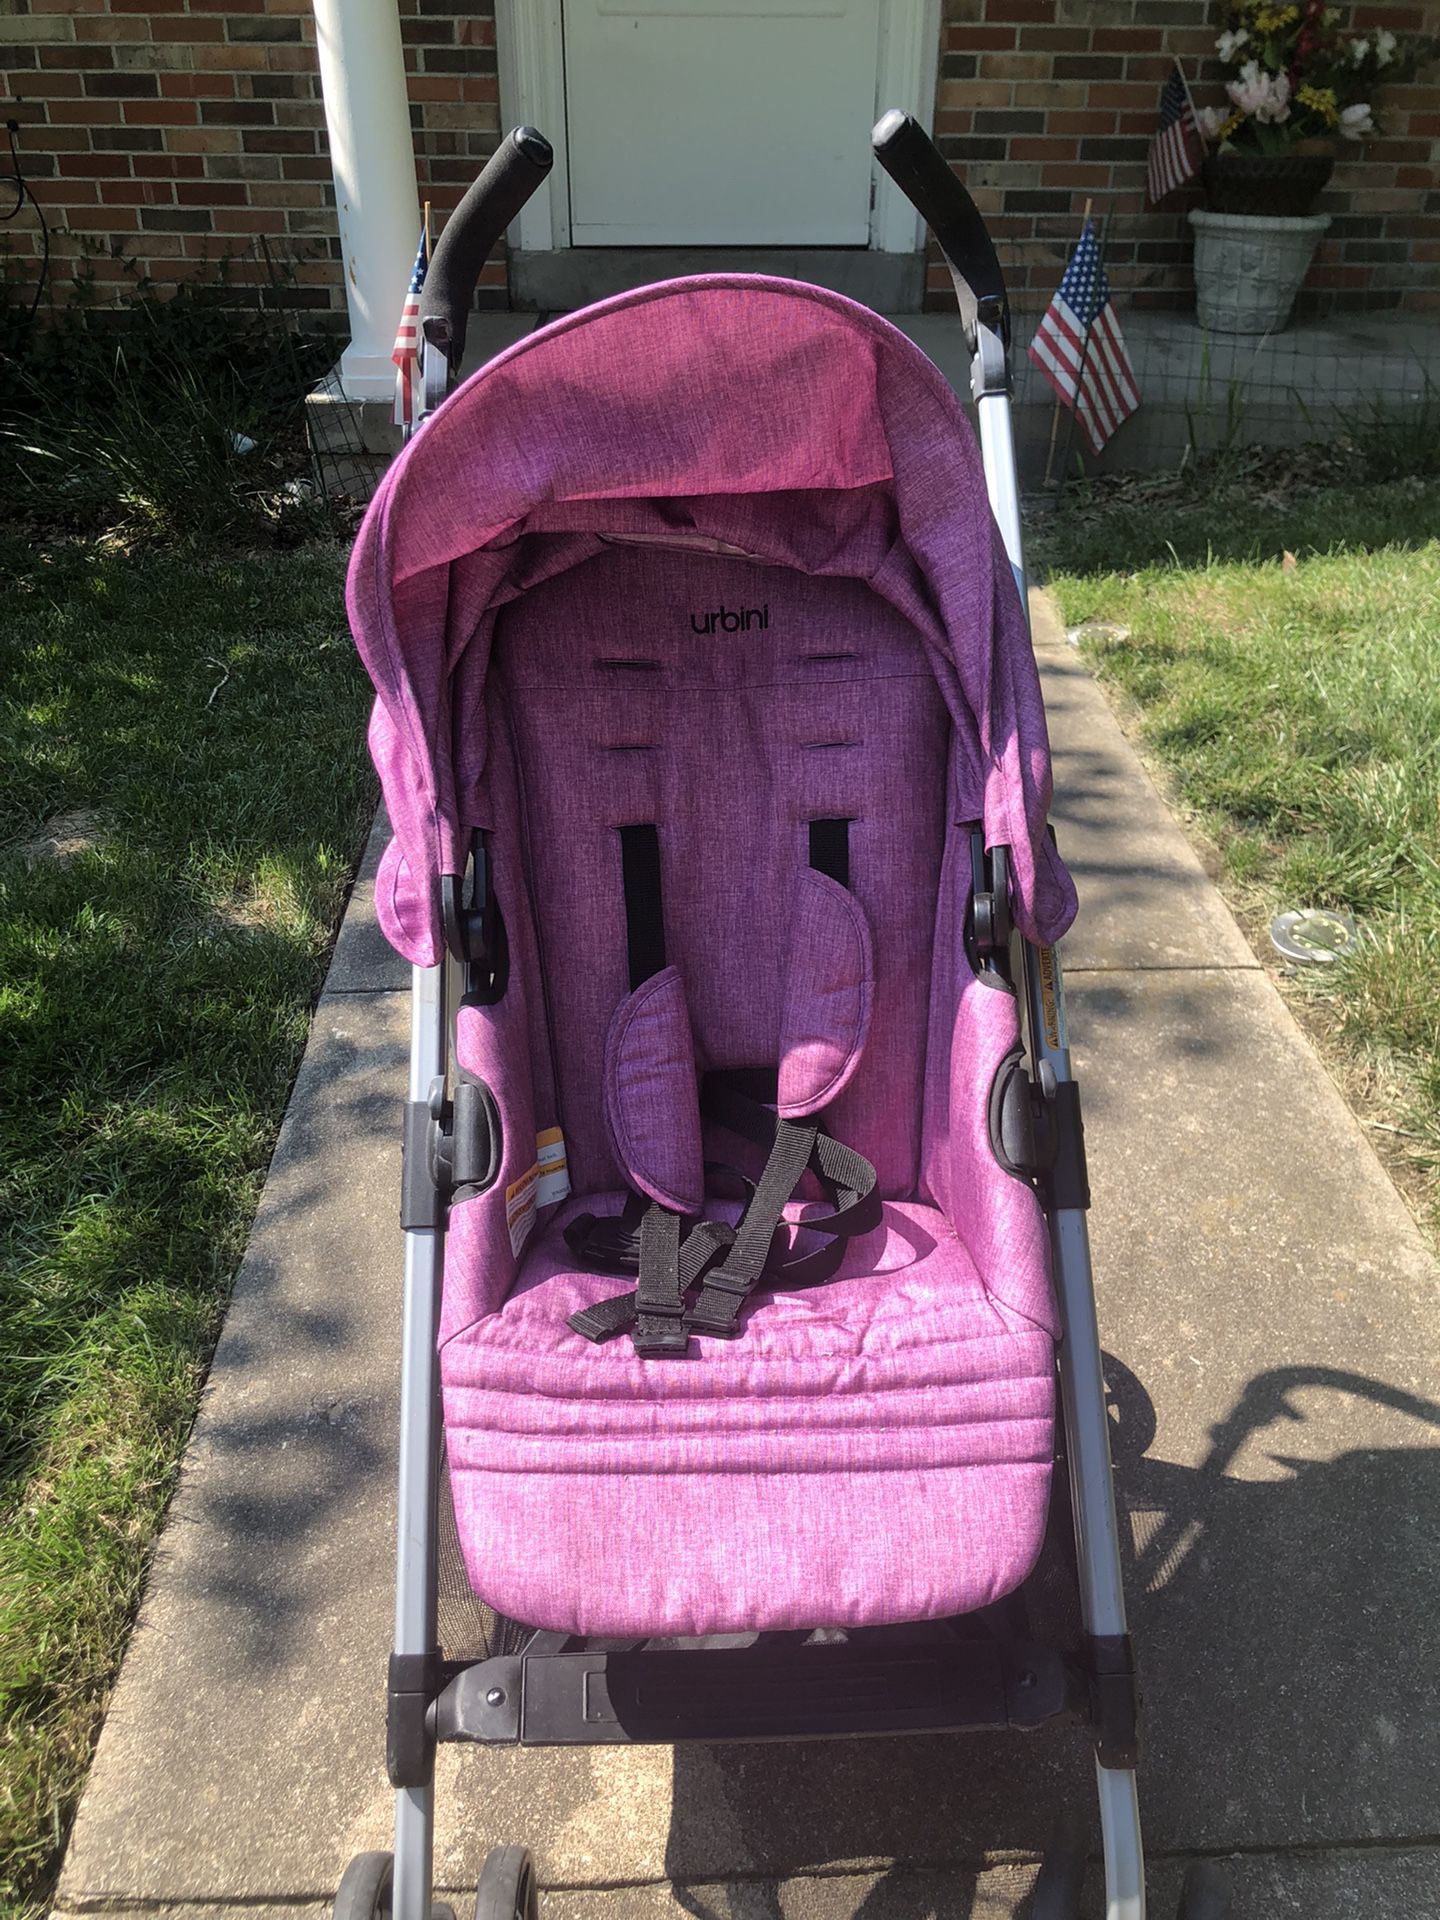 Baby/youngster Buggy Used Once, Grandchild Moved Far Away$25.00